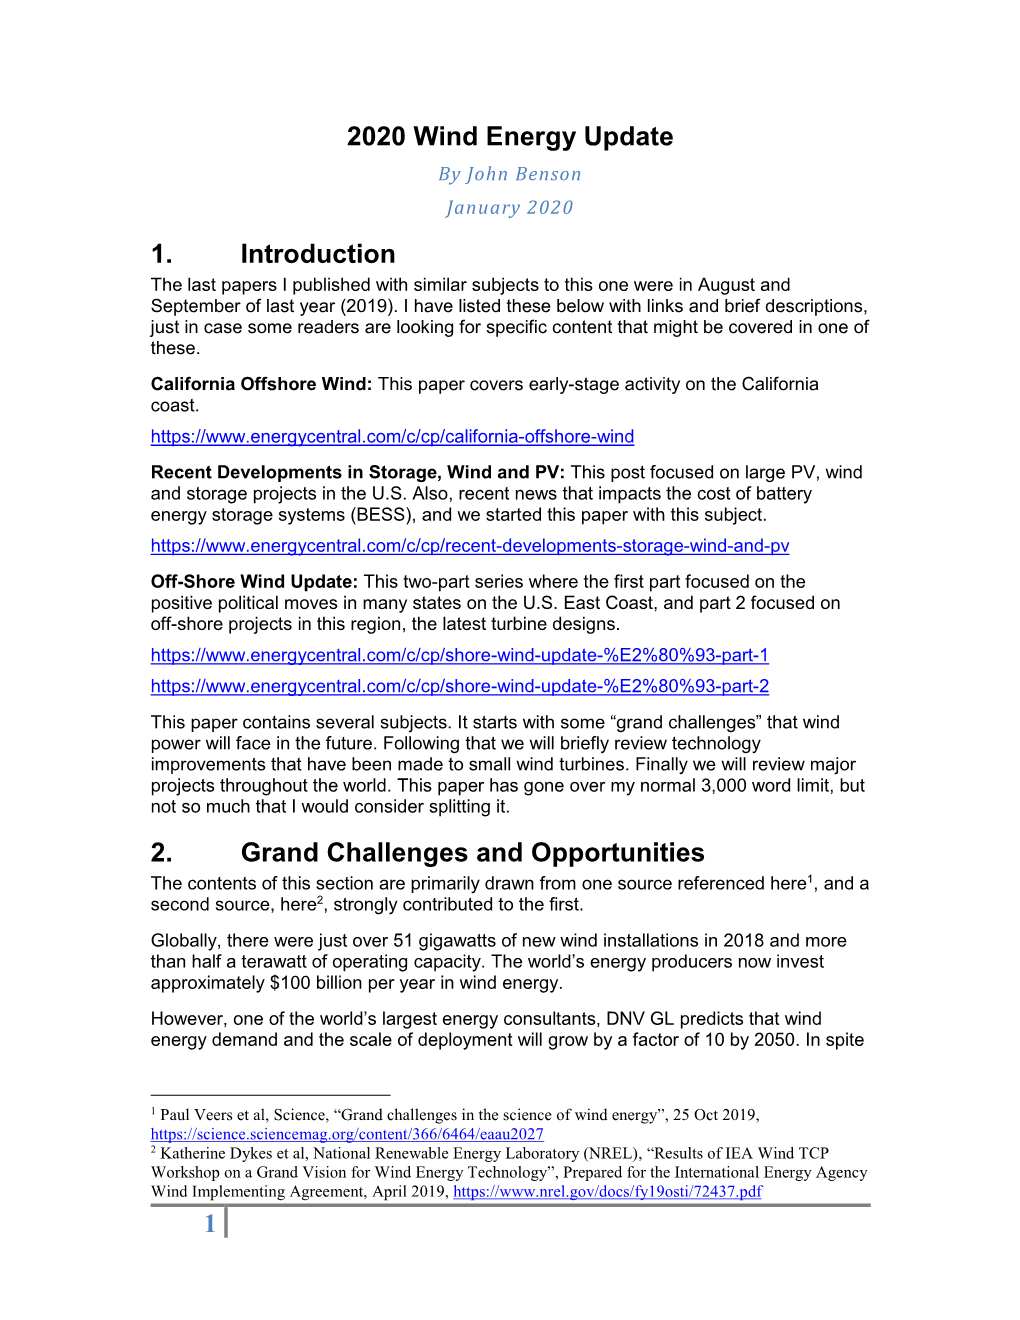 1 2020 Wind Energy Update 1. Introduction 2. Grand Challenges